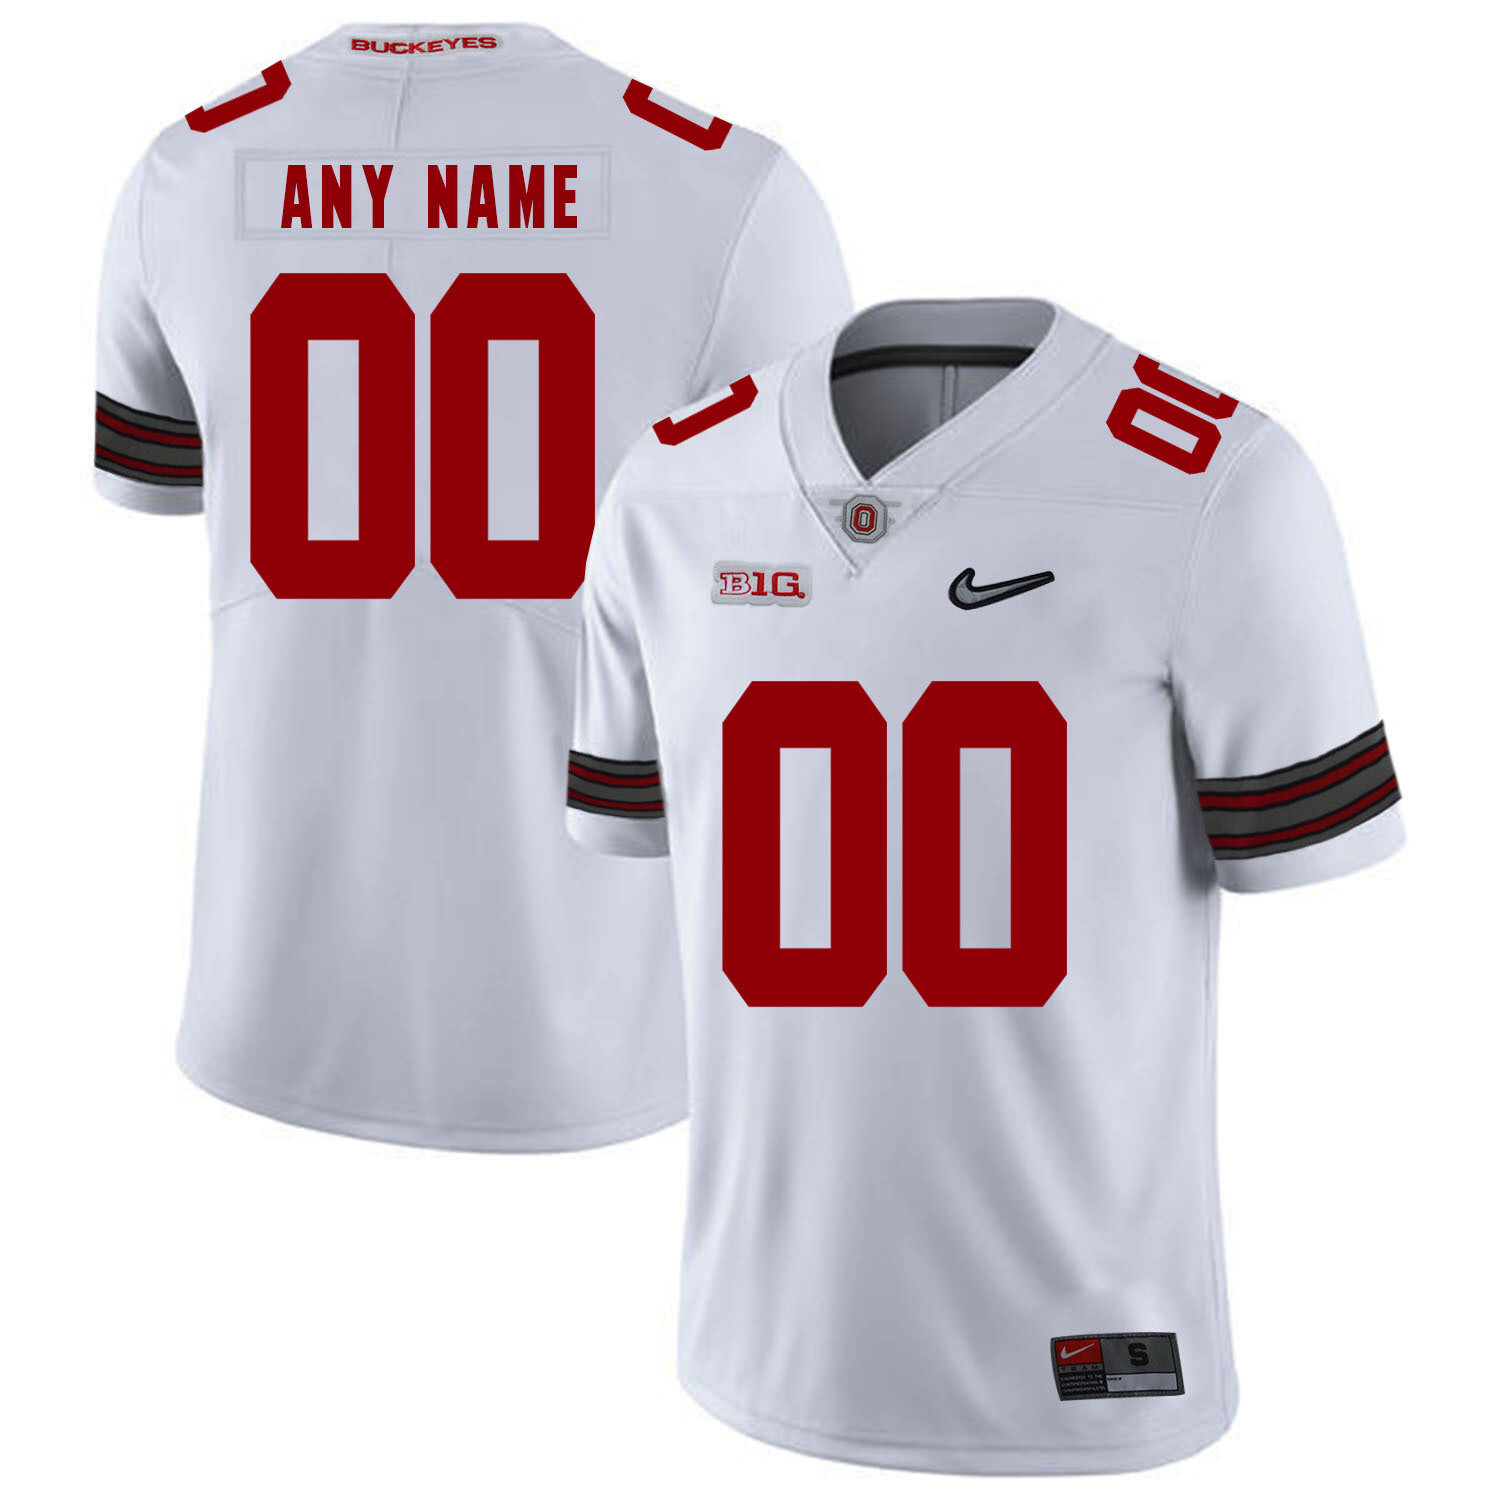 Ohio State Buckeyes Custom Name and Number Football Jersey Diamond Patch White